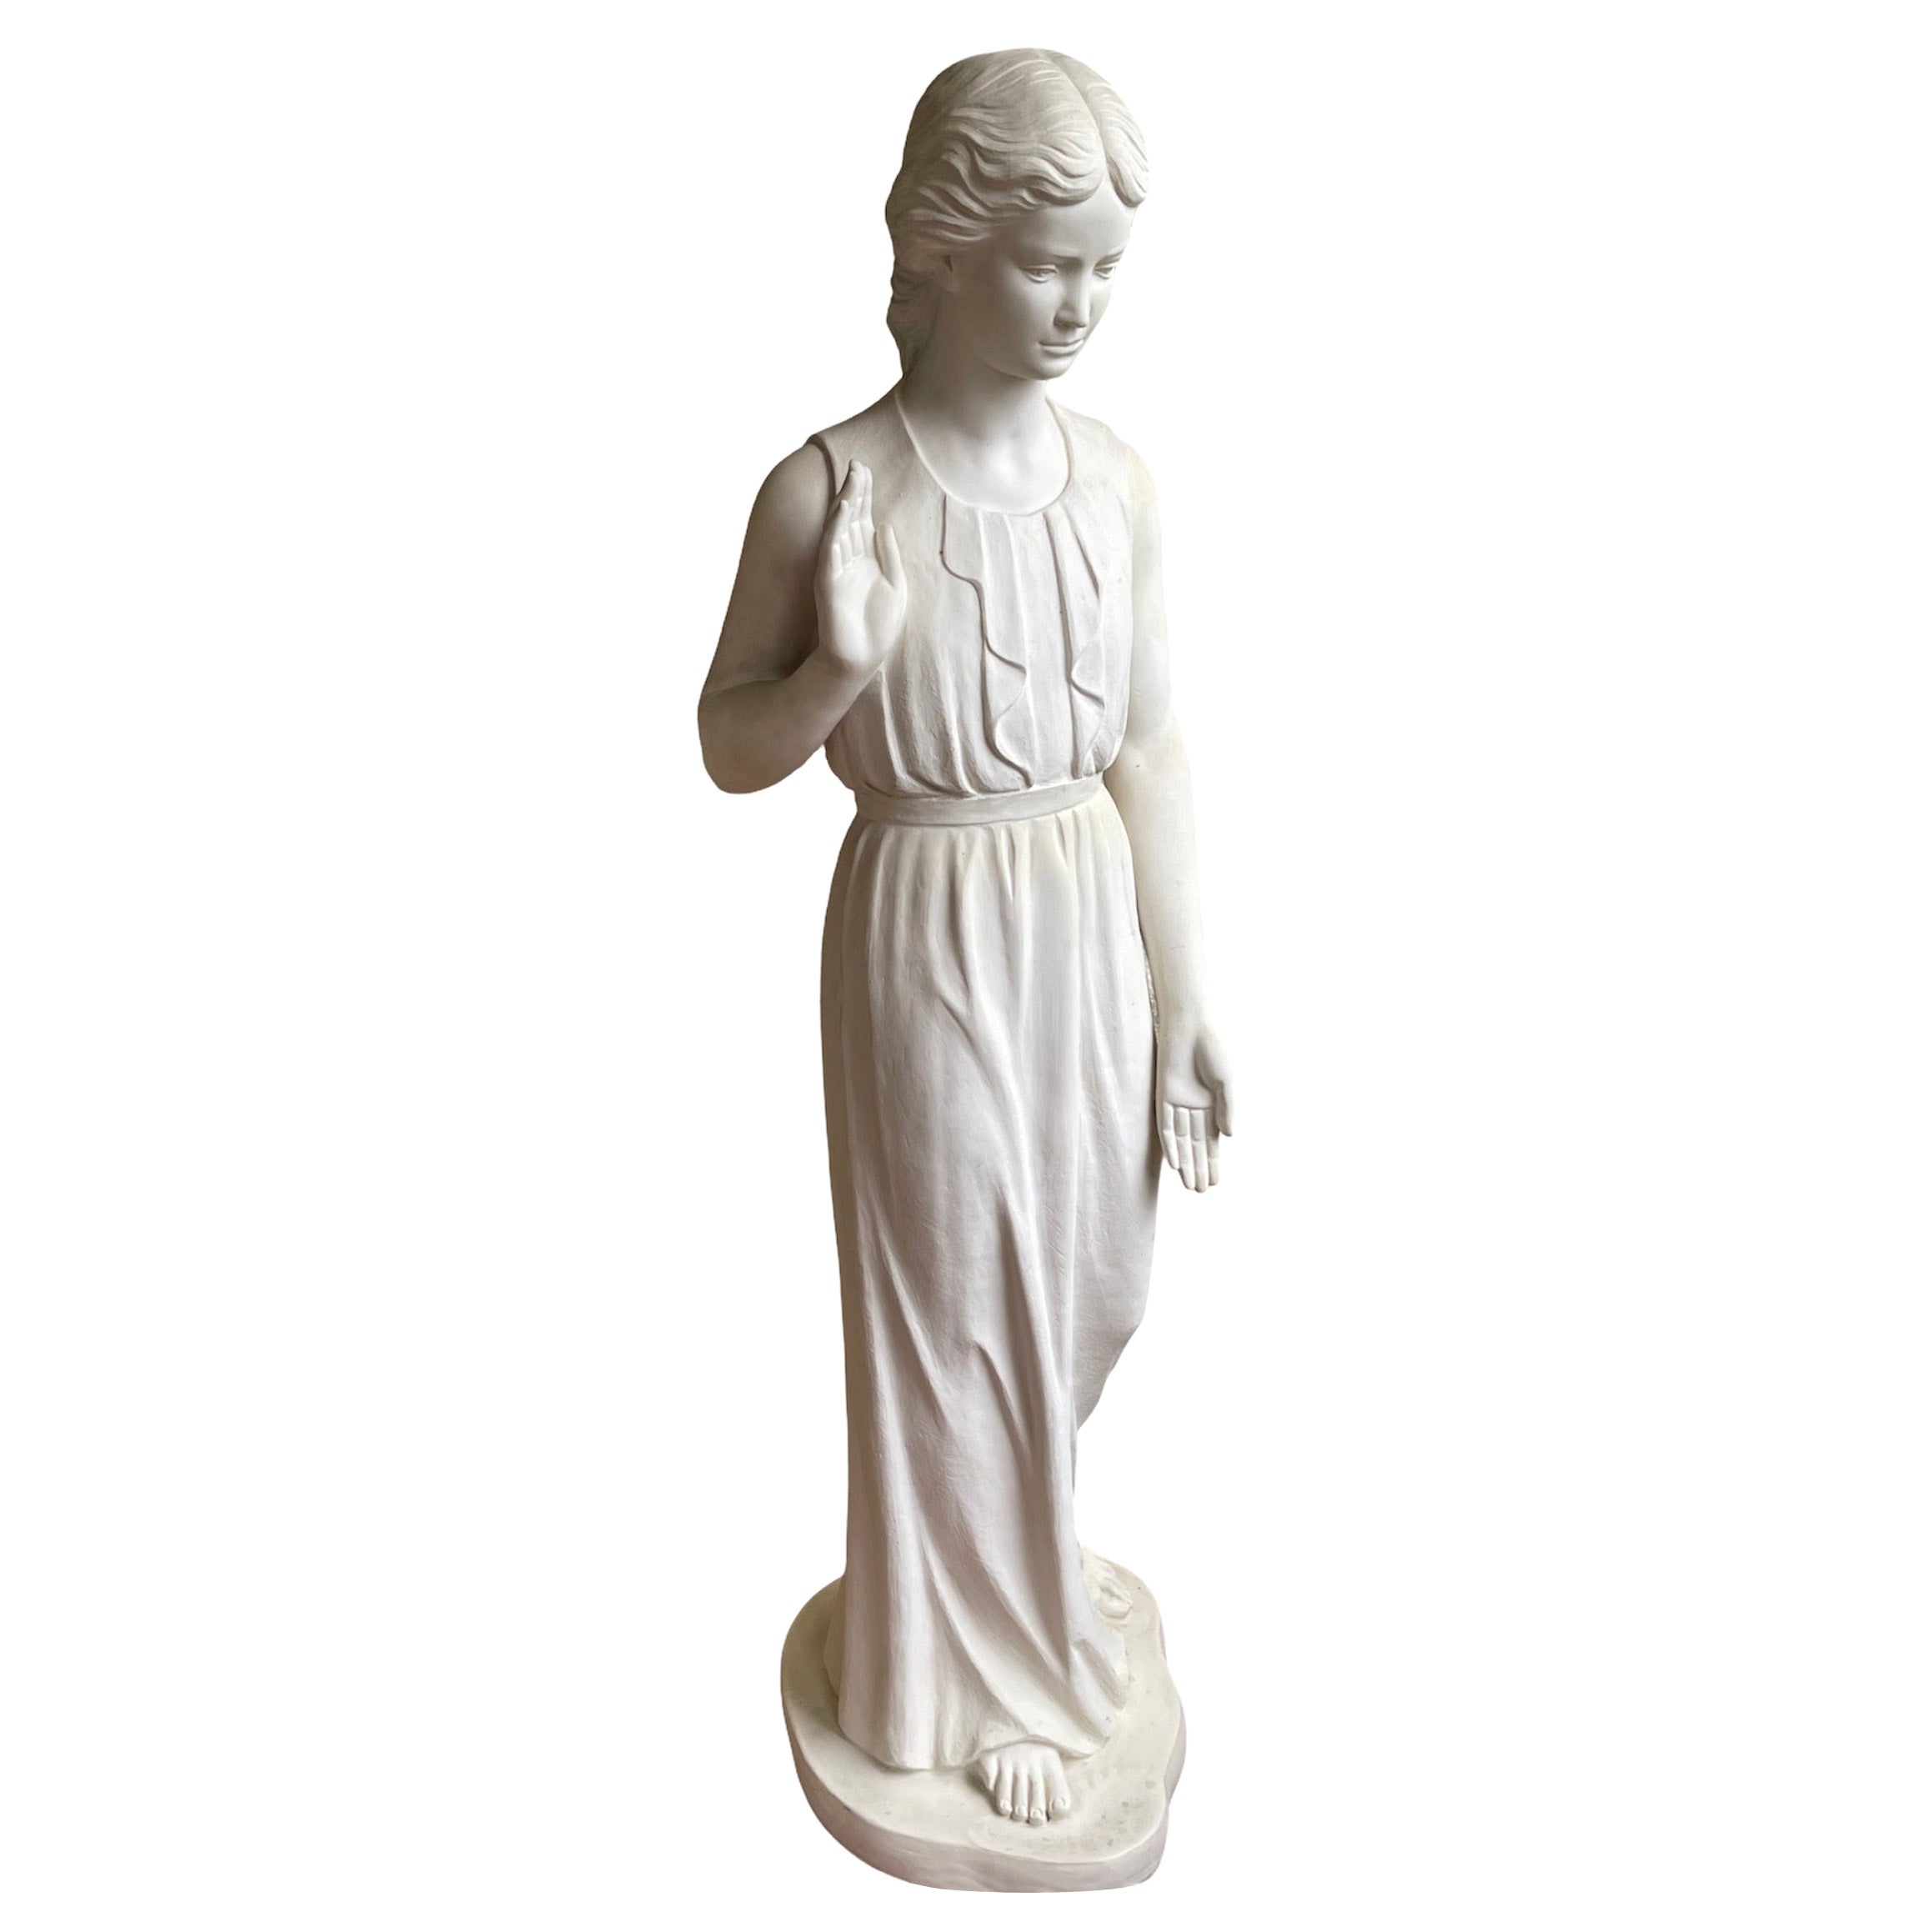 Life Size Bonded or Cold Cast Marble Garden Sculpture of a Young Girl For Sale